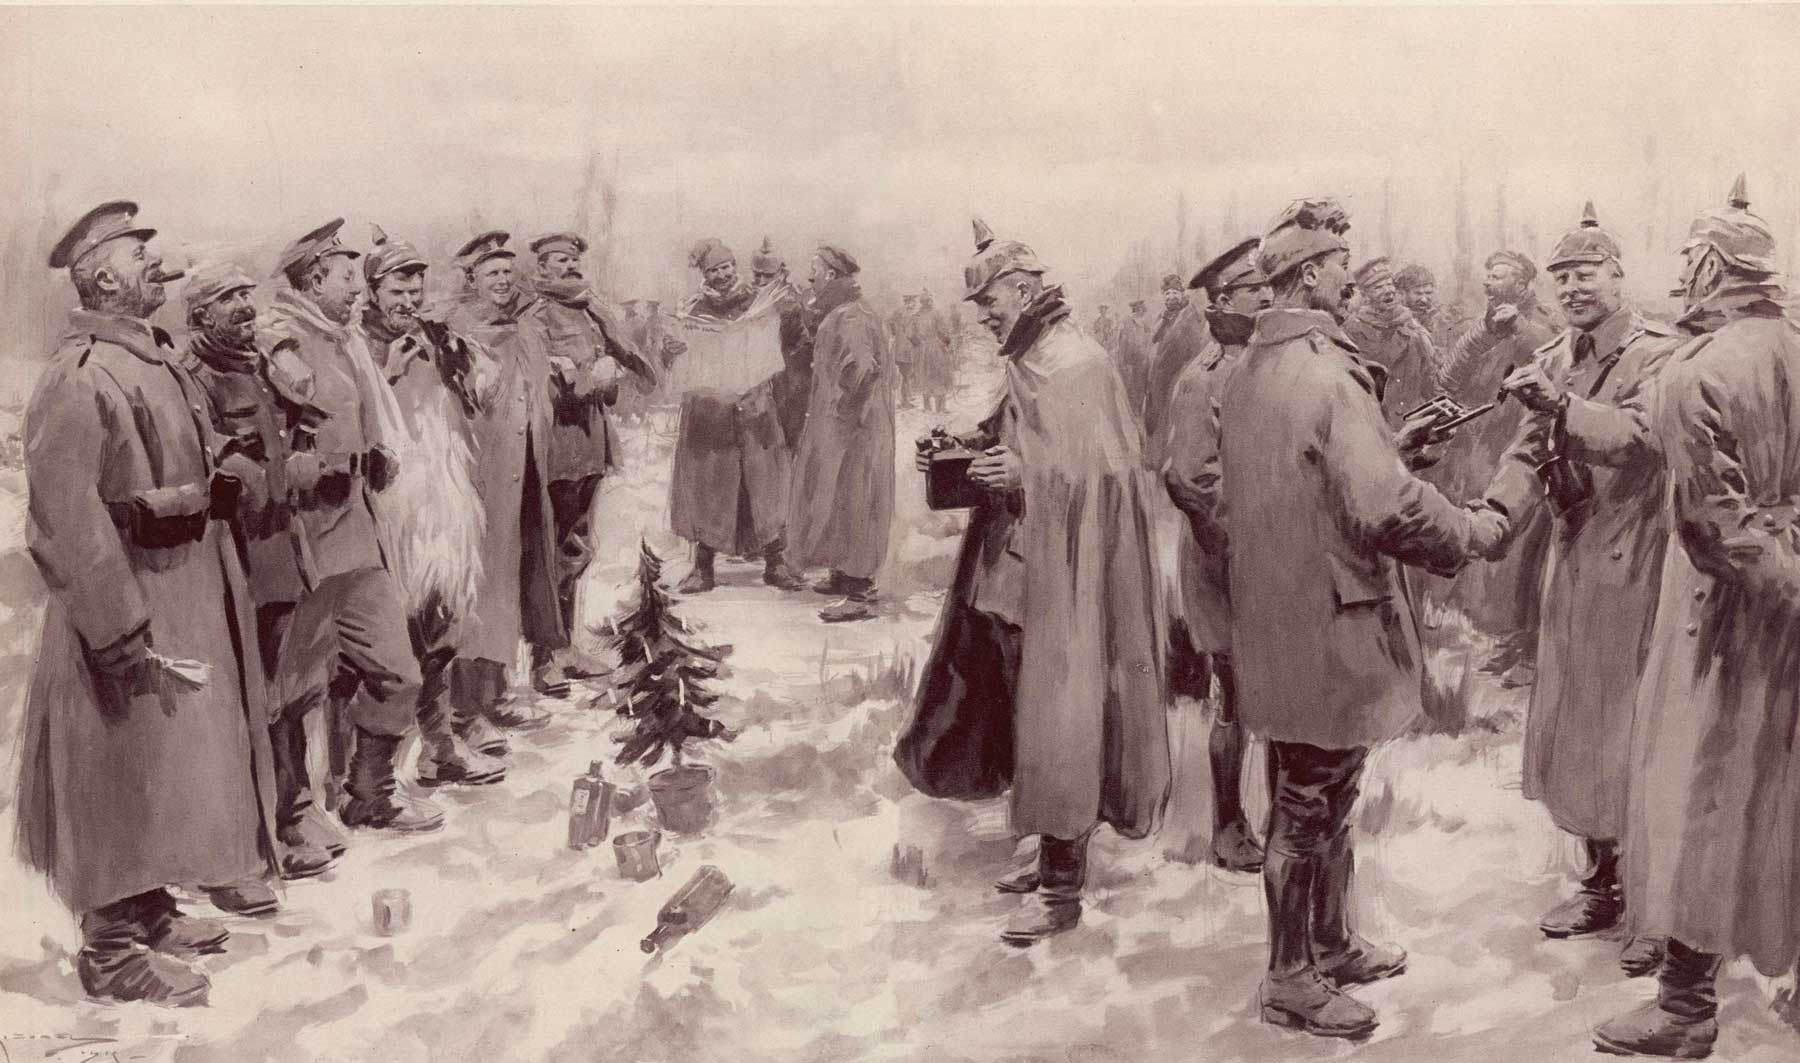 British and German WWI soldiers socializing around a small Christmas tree